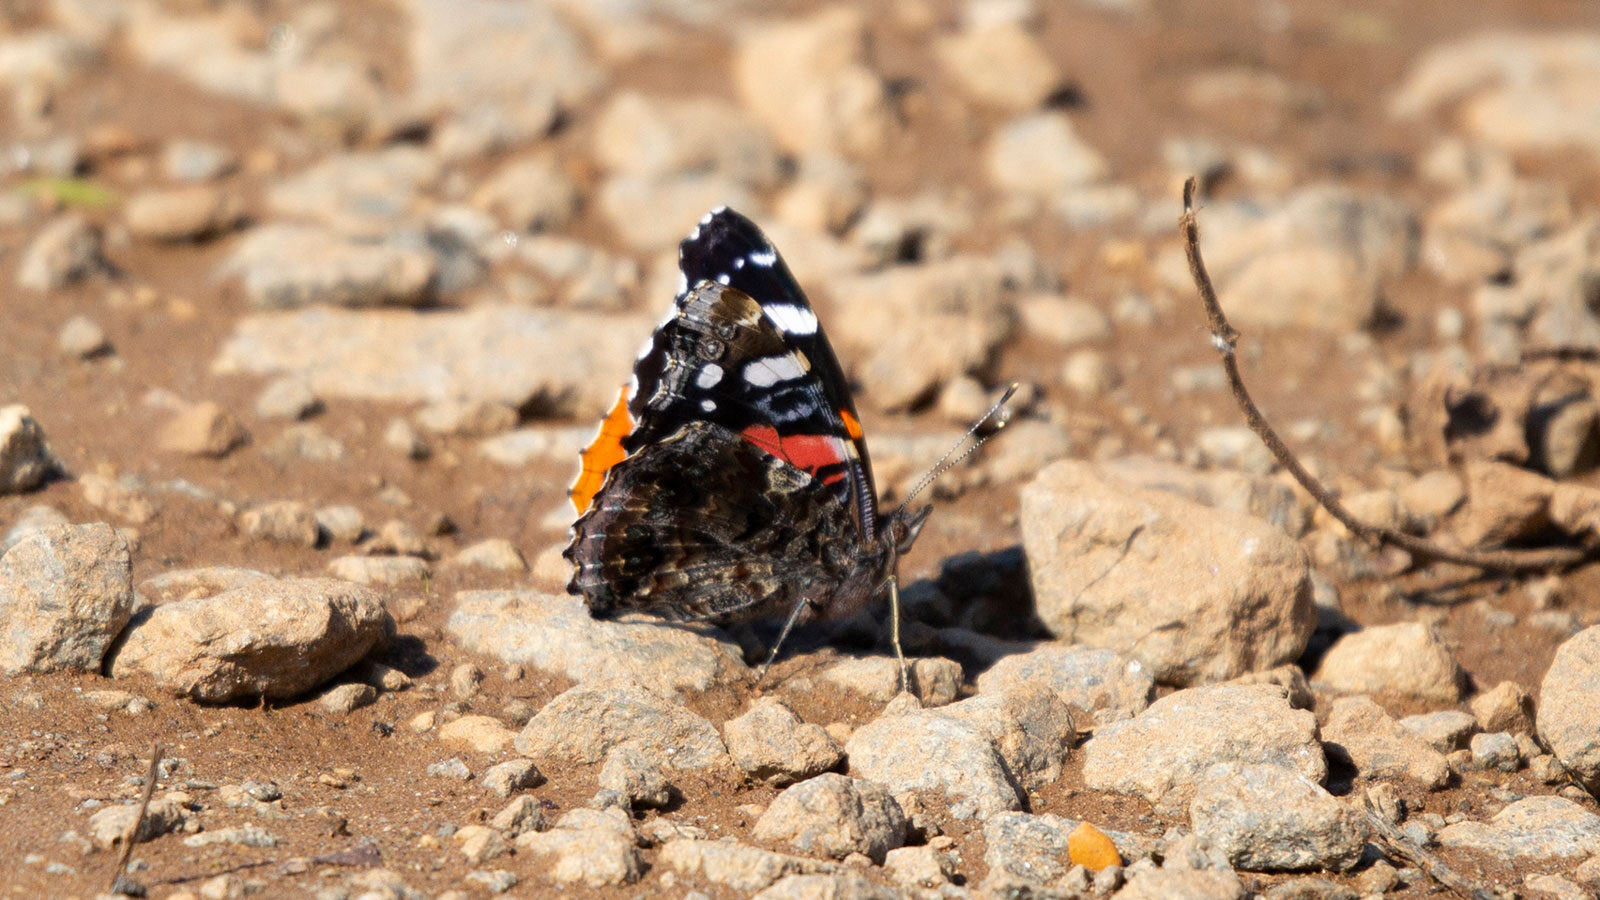 Red admiral butterfly on a dirt and gravel road